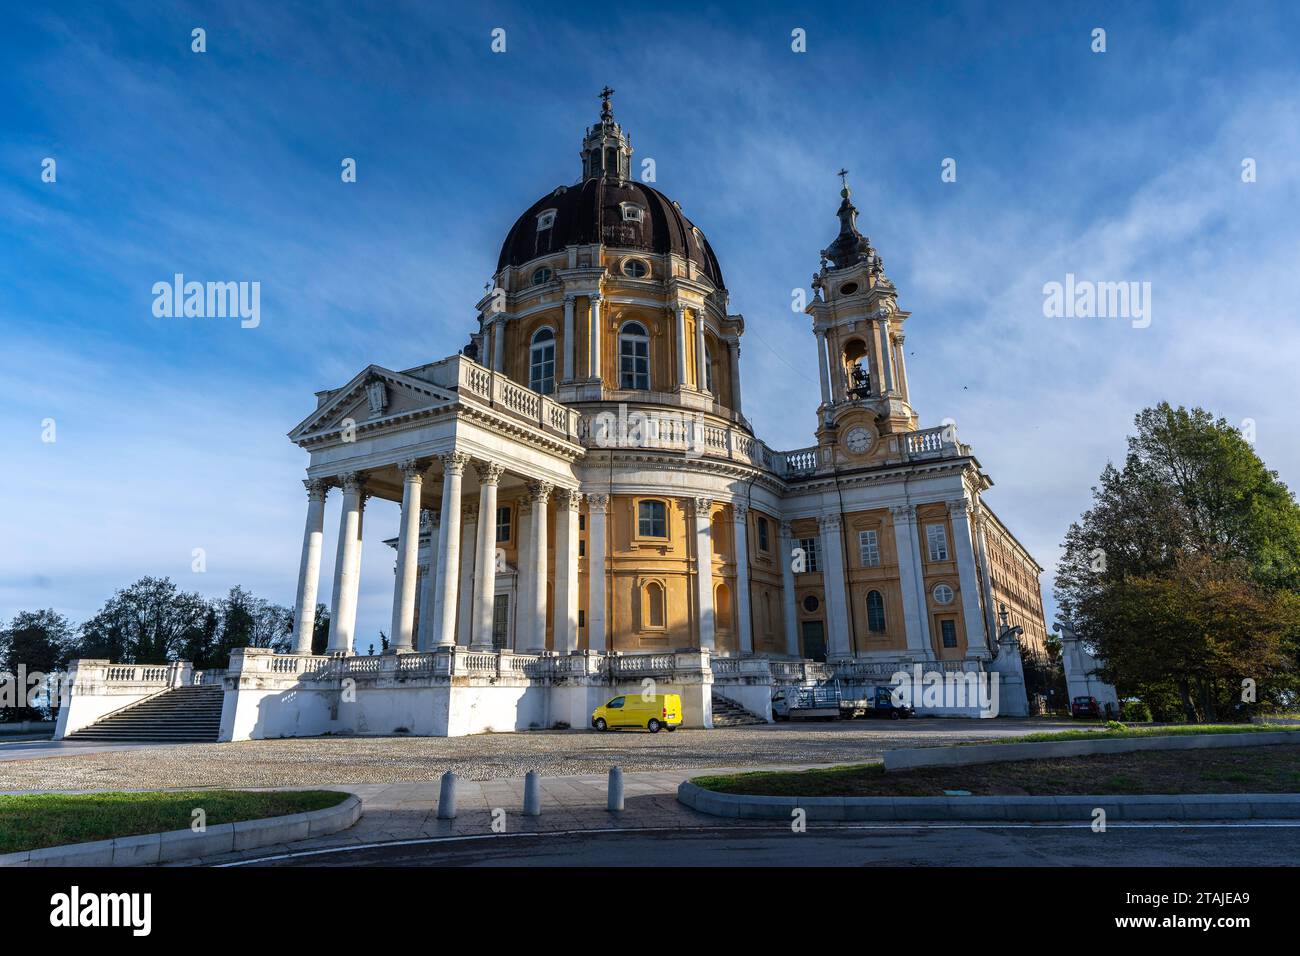 View of the Basilica of Superga in autumn (Piedmont, Italy) Stock Photo